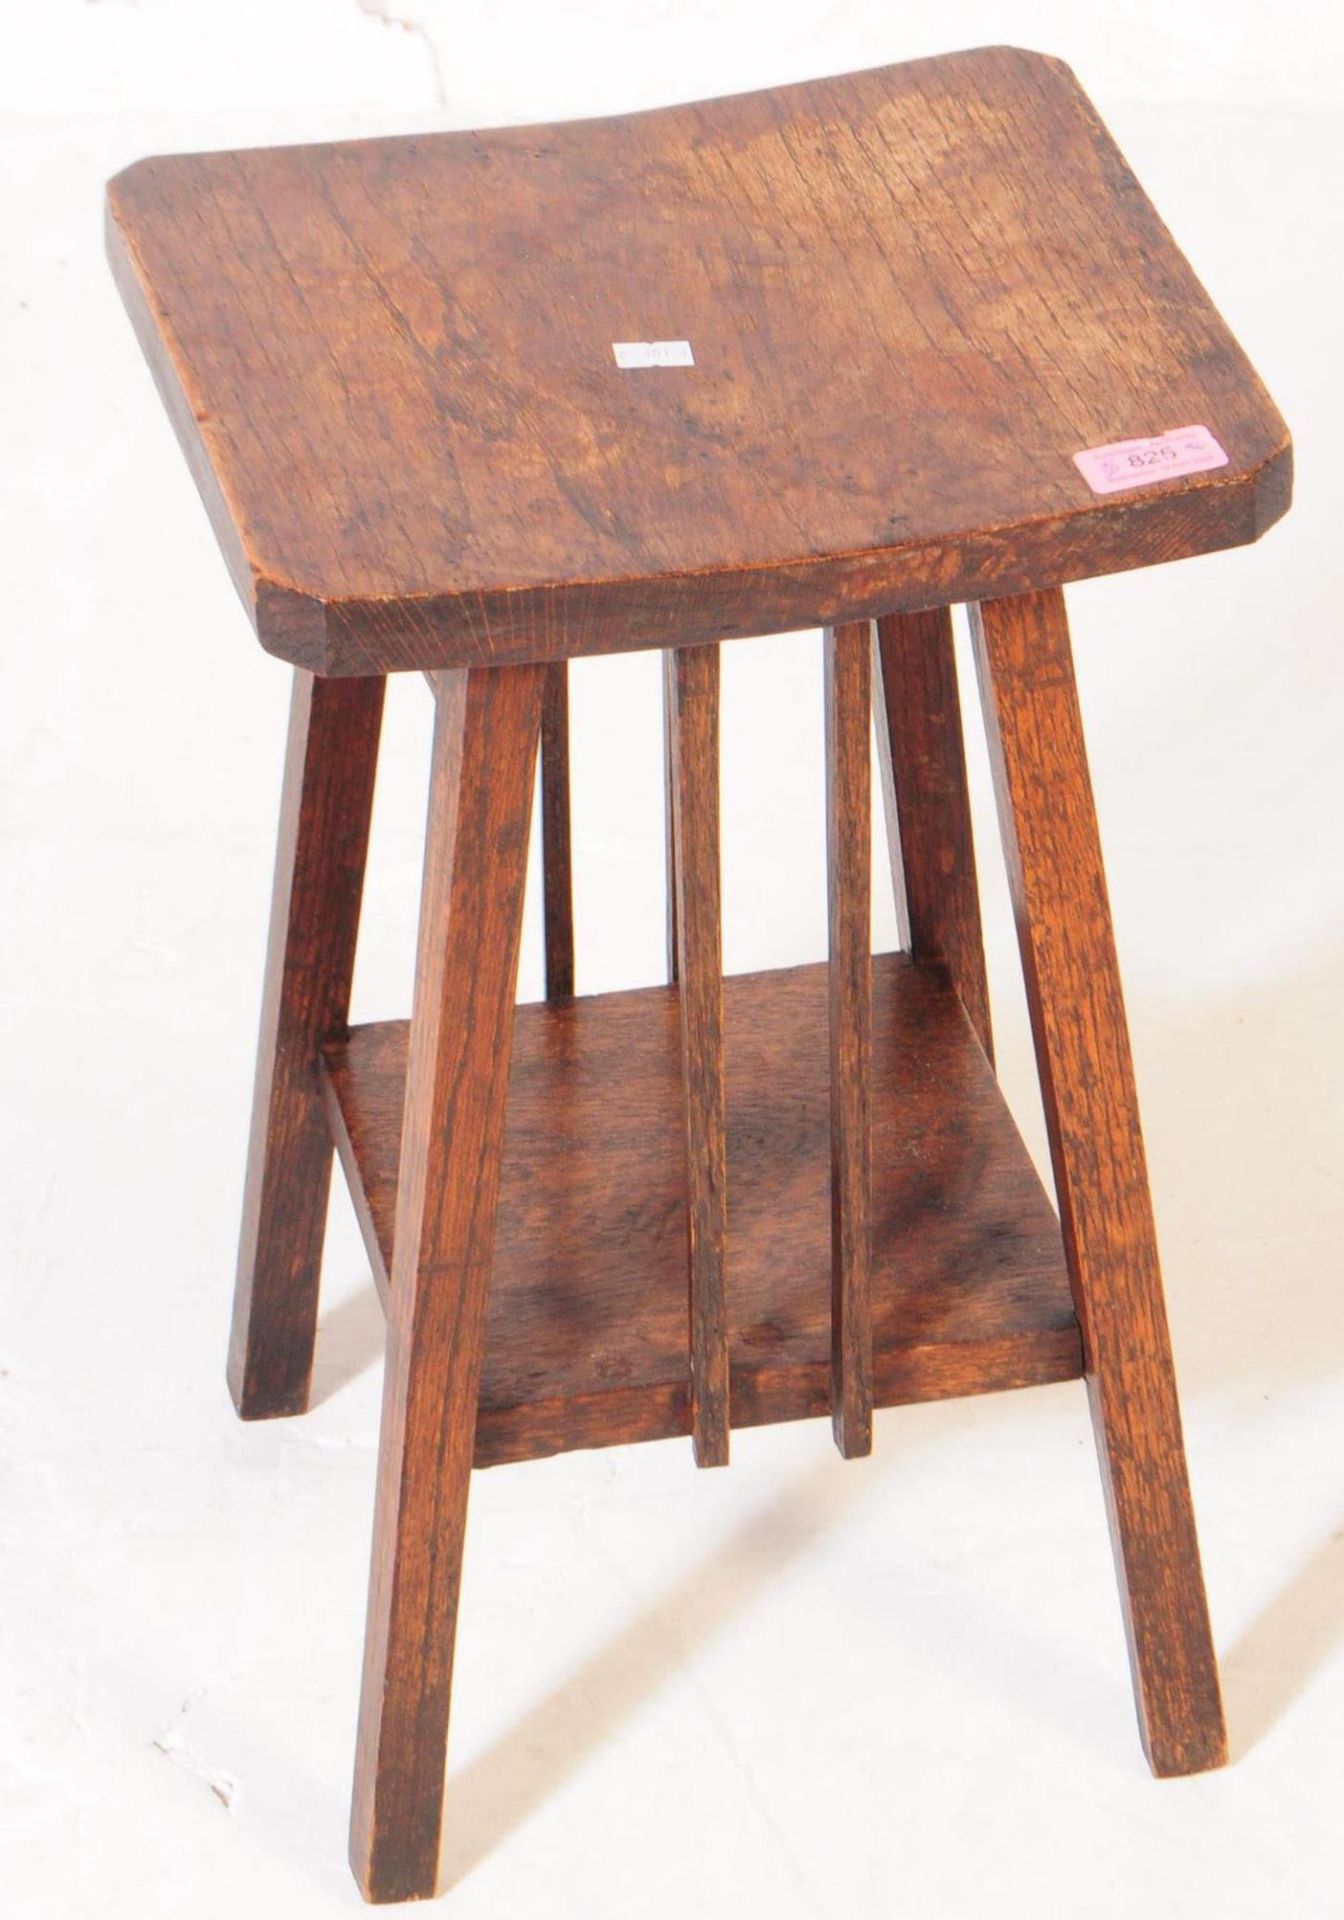 VICTORIAN ARTS AND CRAFTS SQUARE ELM FARMHOUSE STOOL - Image 2 of 6